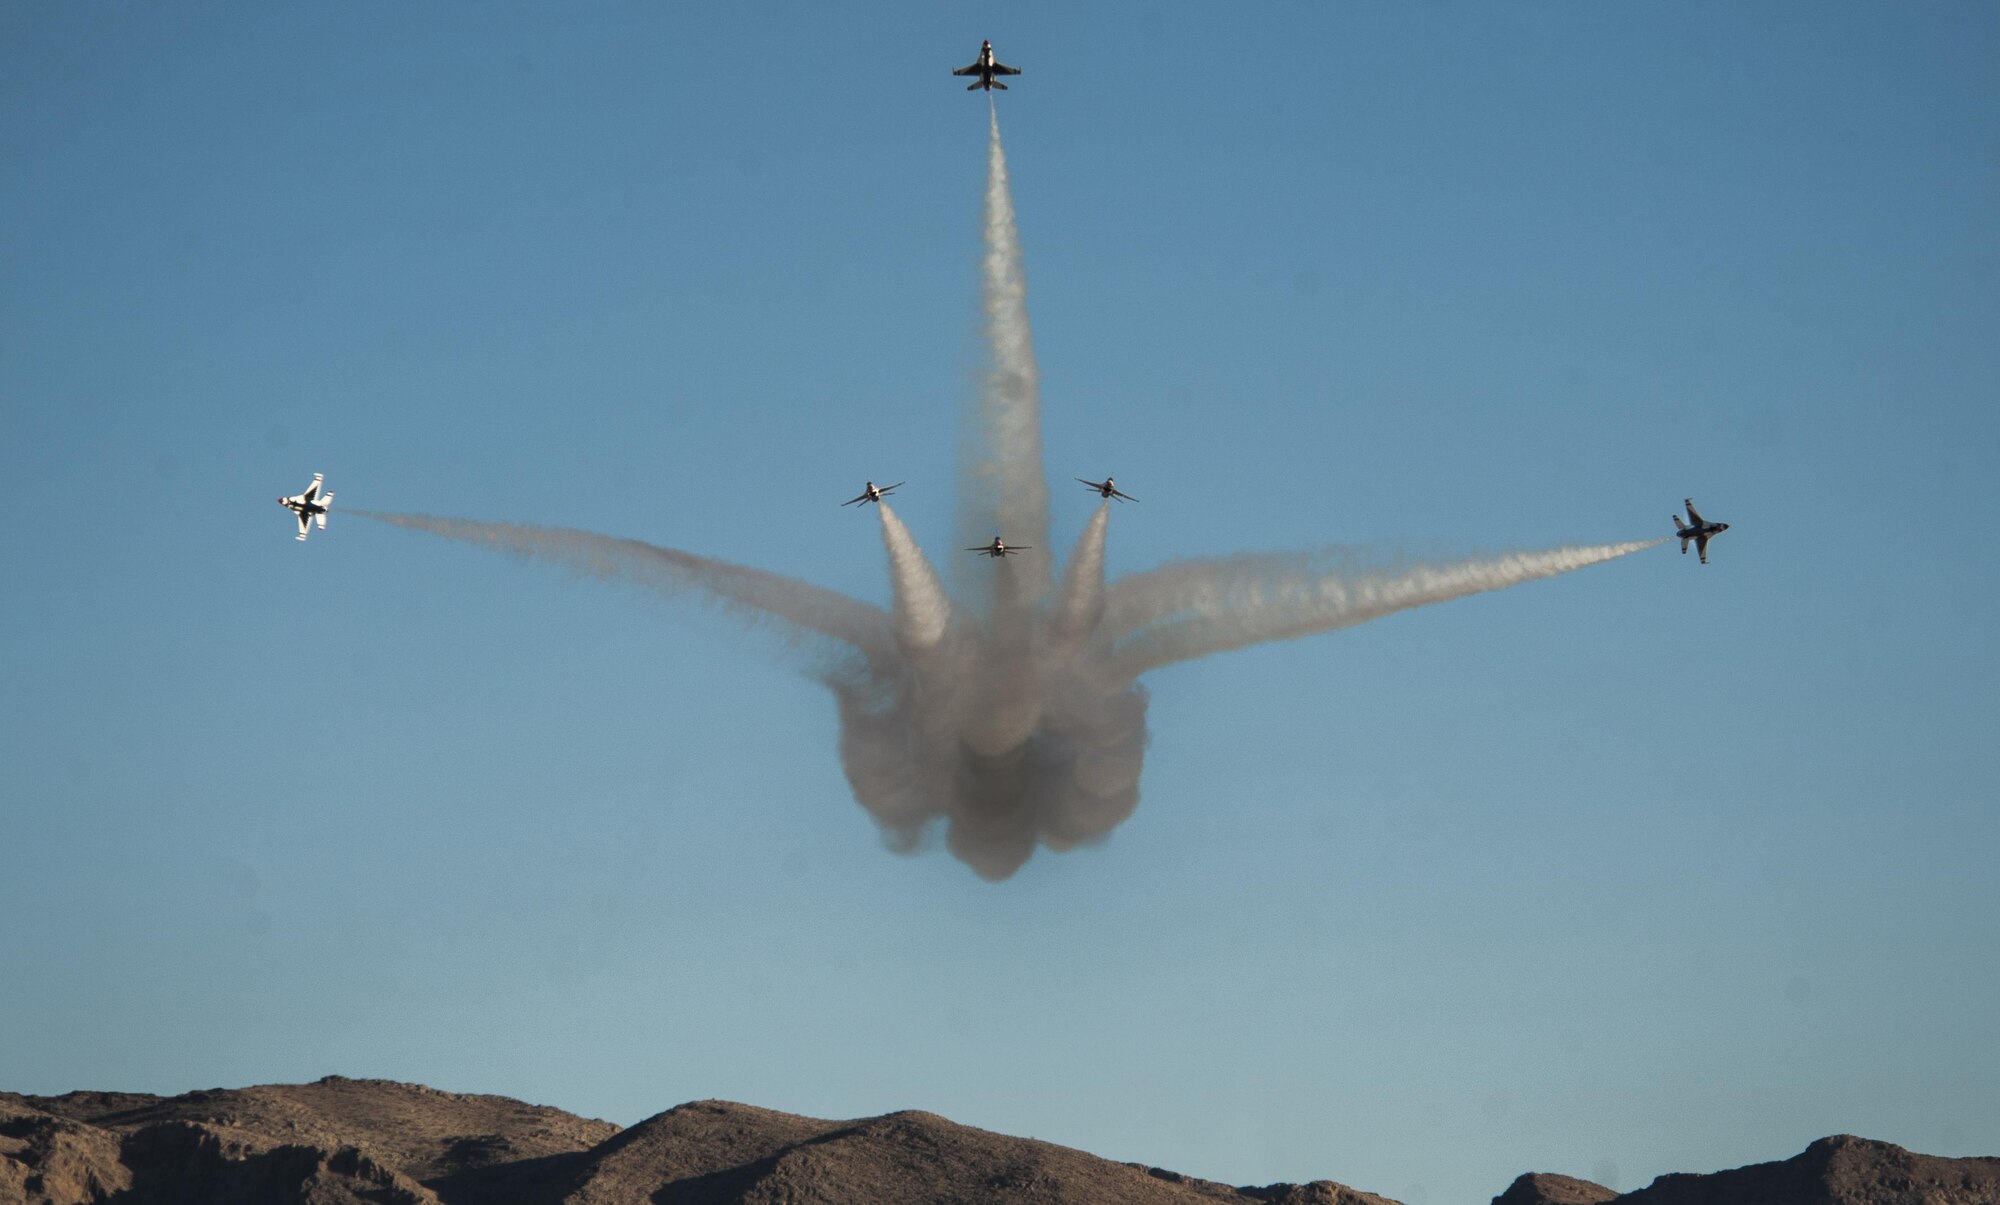 The U.S. Air Force Thunderbirds Air Demonstration Squadron perform the bomb burst maneuver during the Aviation Nation air show on Nellis Air Force Base, Nev., Nov. 13, 2016. The air show brought more than 295,000 spectators from across the globe to experience "75 Years of Air Power." (U.S. Air Force photo by Airman 1st Class Kevin Tanenbaum/Released)